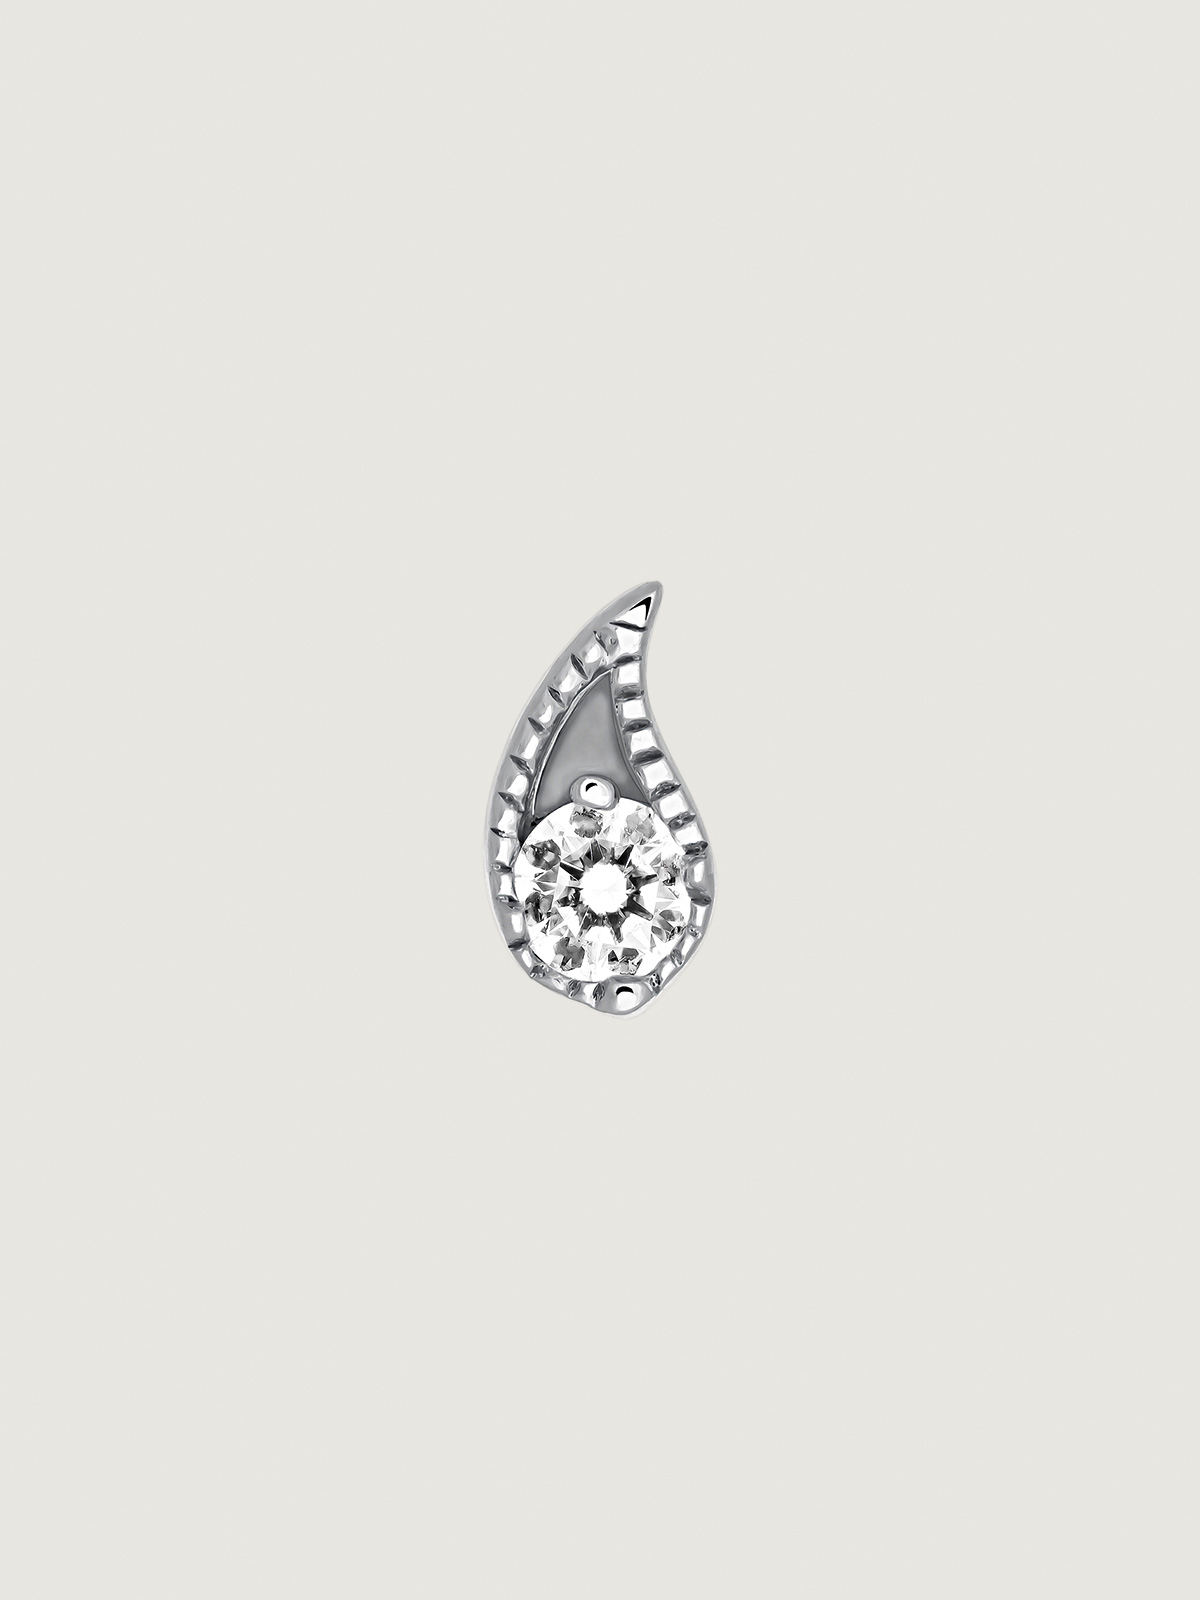 9K white gold piercing with diamonds and teardrop shape.